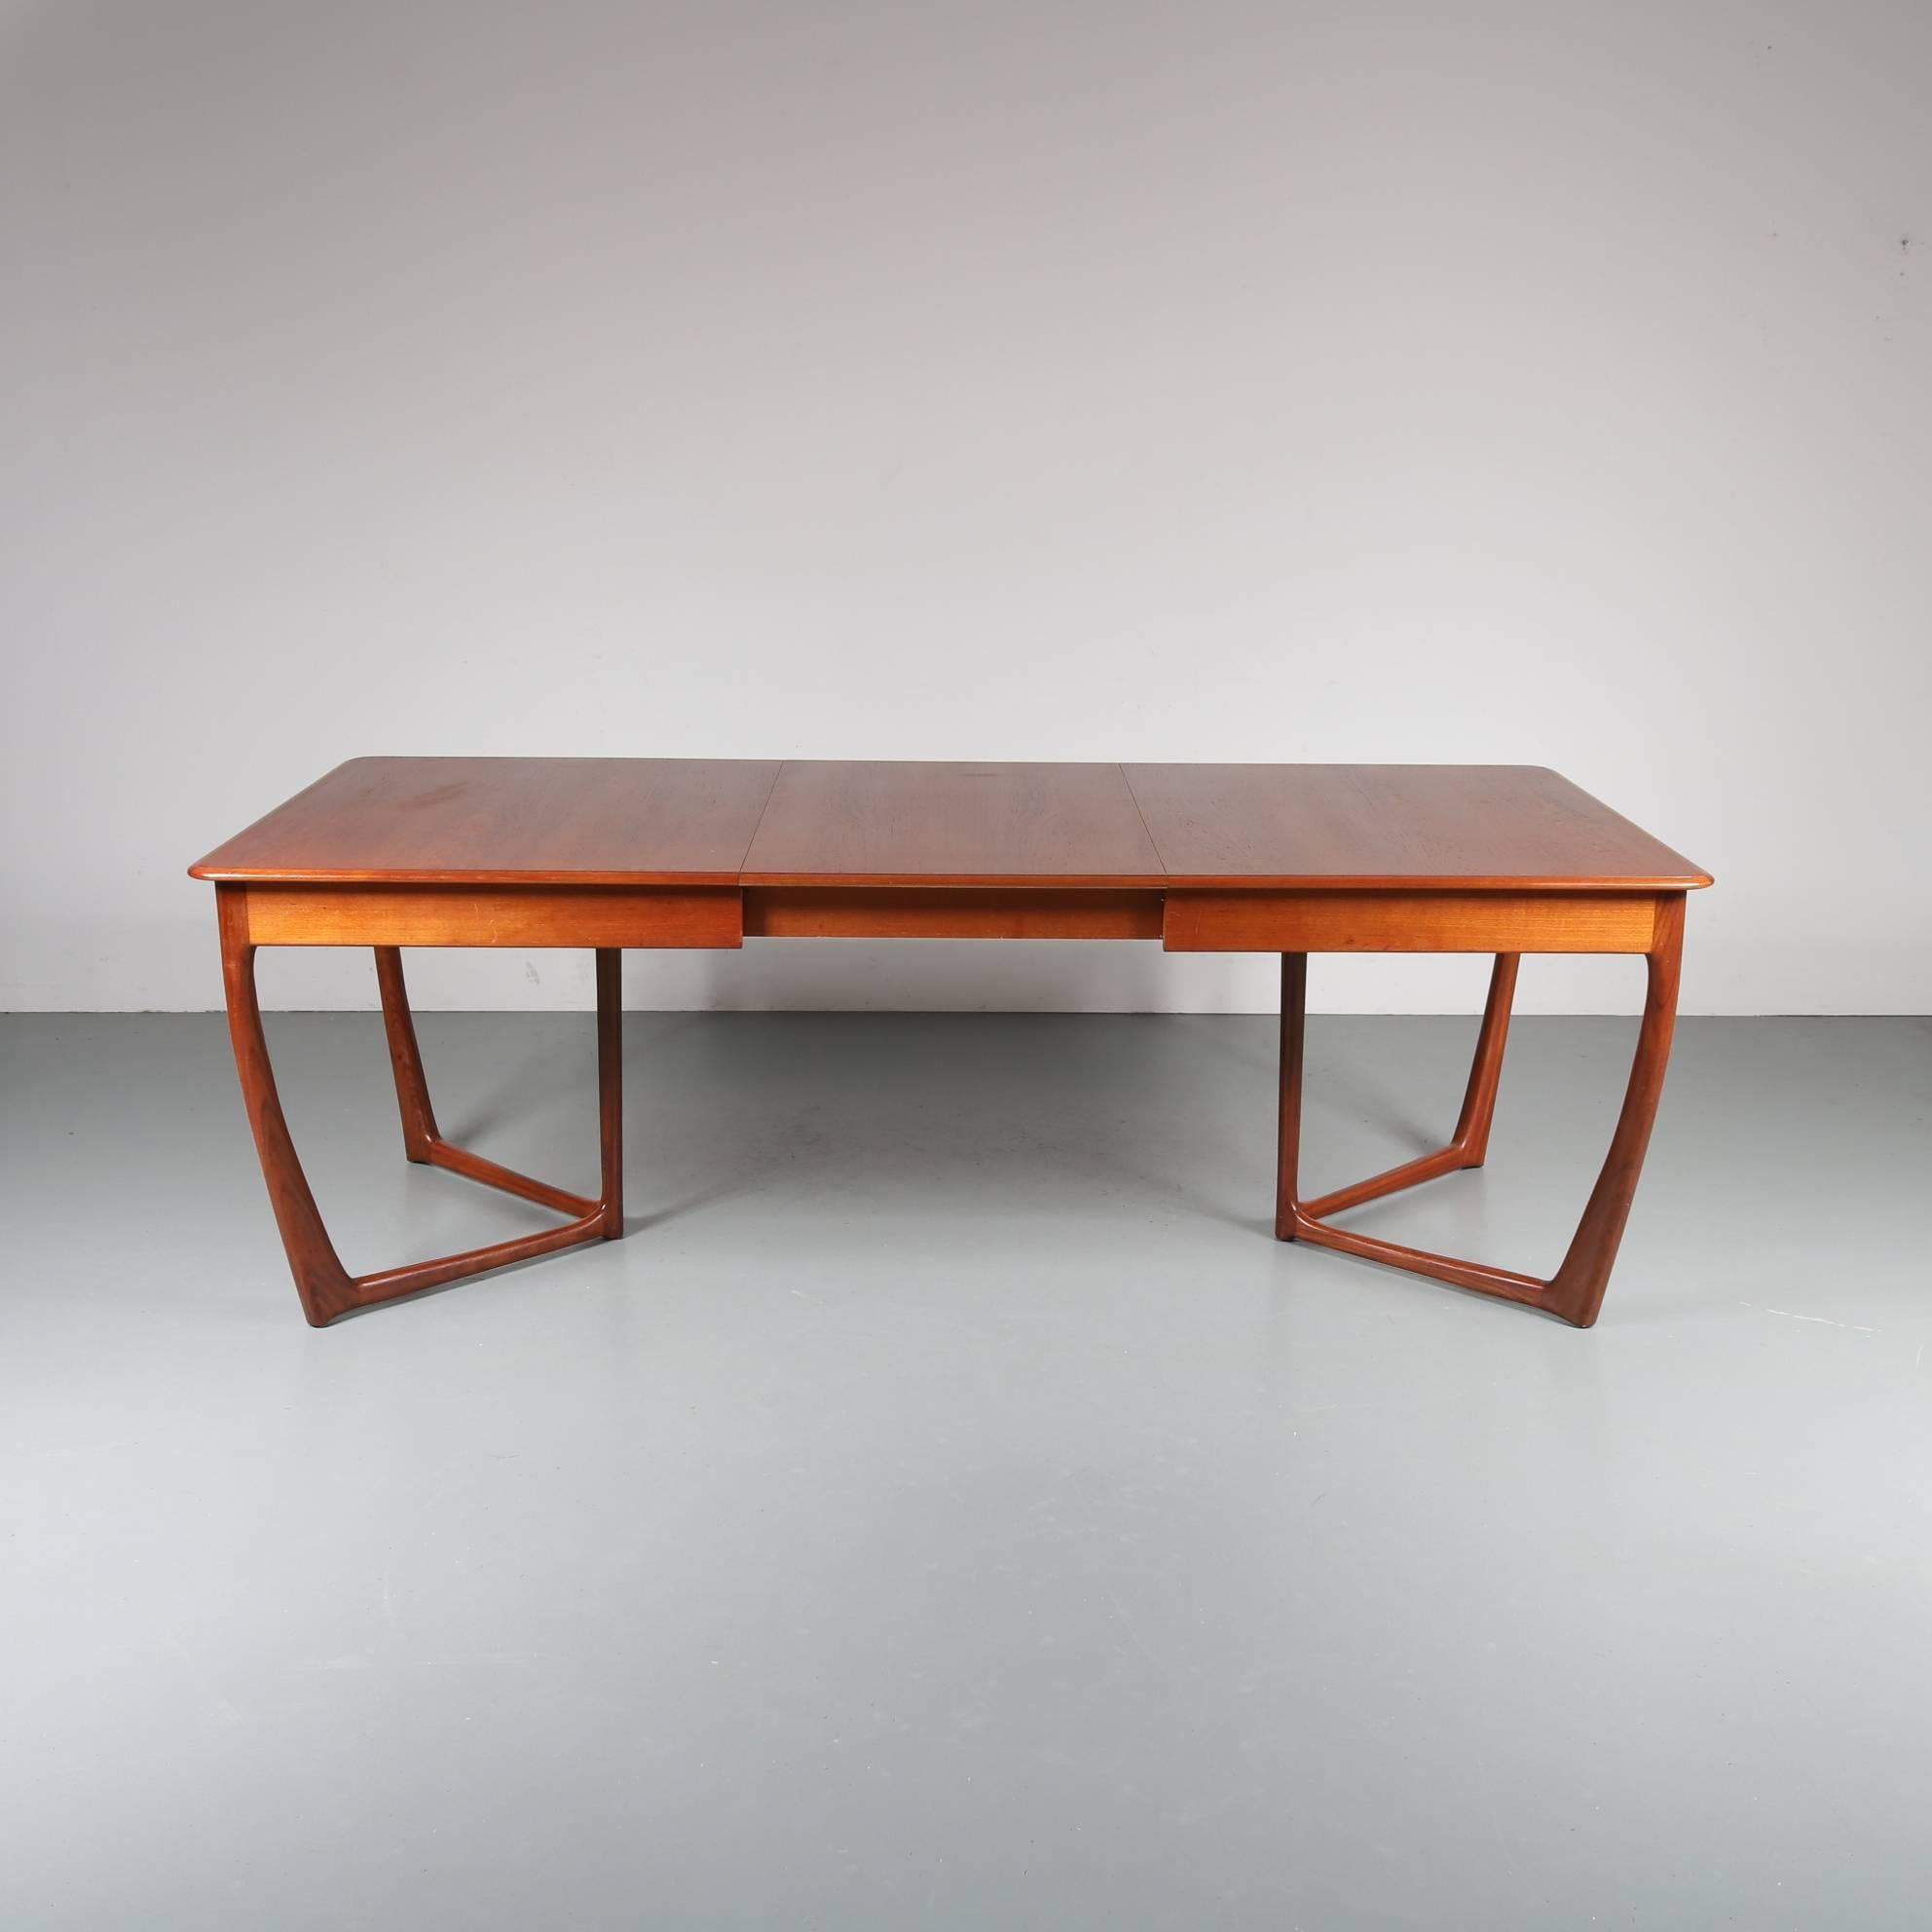 Scottish Extendable Dining Table by Beithcraft in Scotland, 1950s